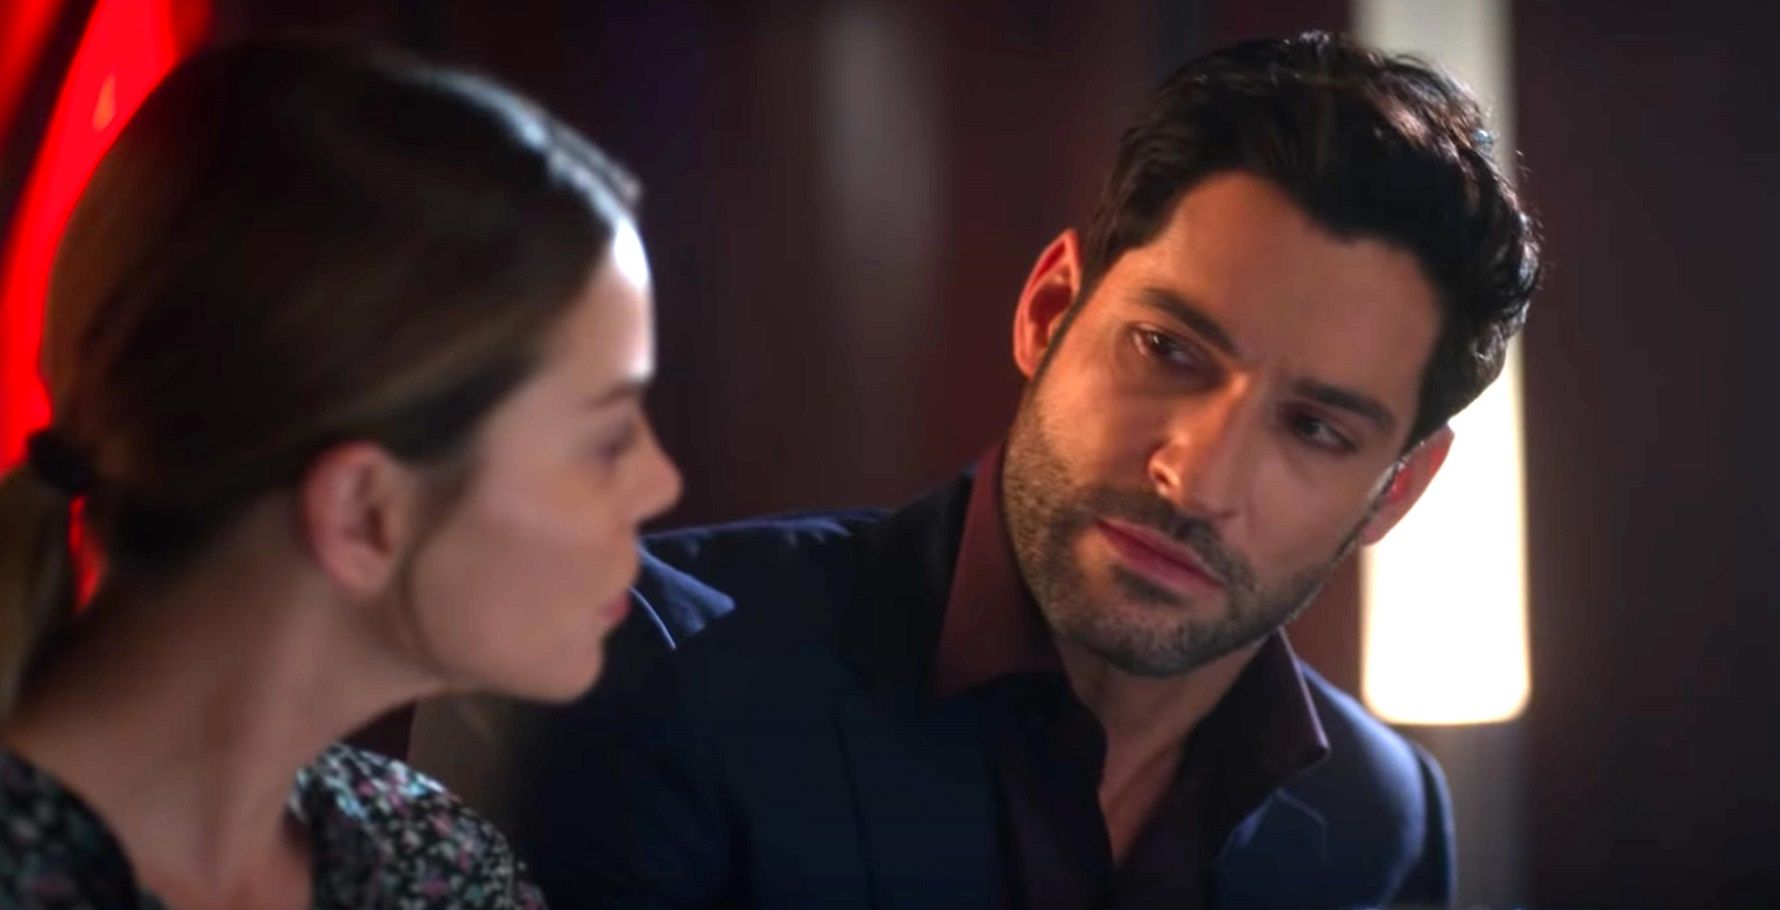 in which lucifer episode does chloe make a pass at lucifer